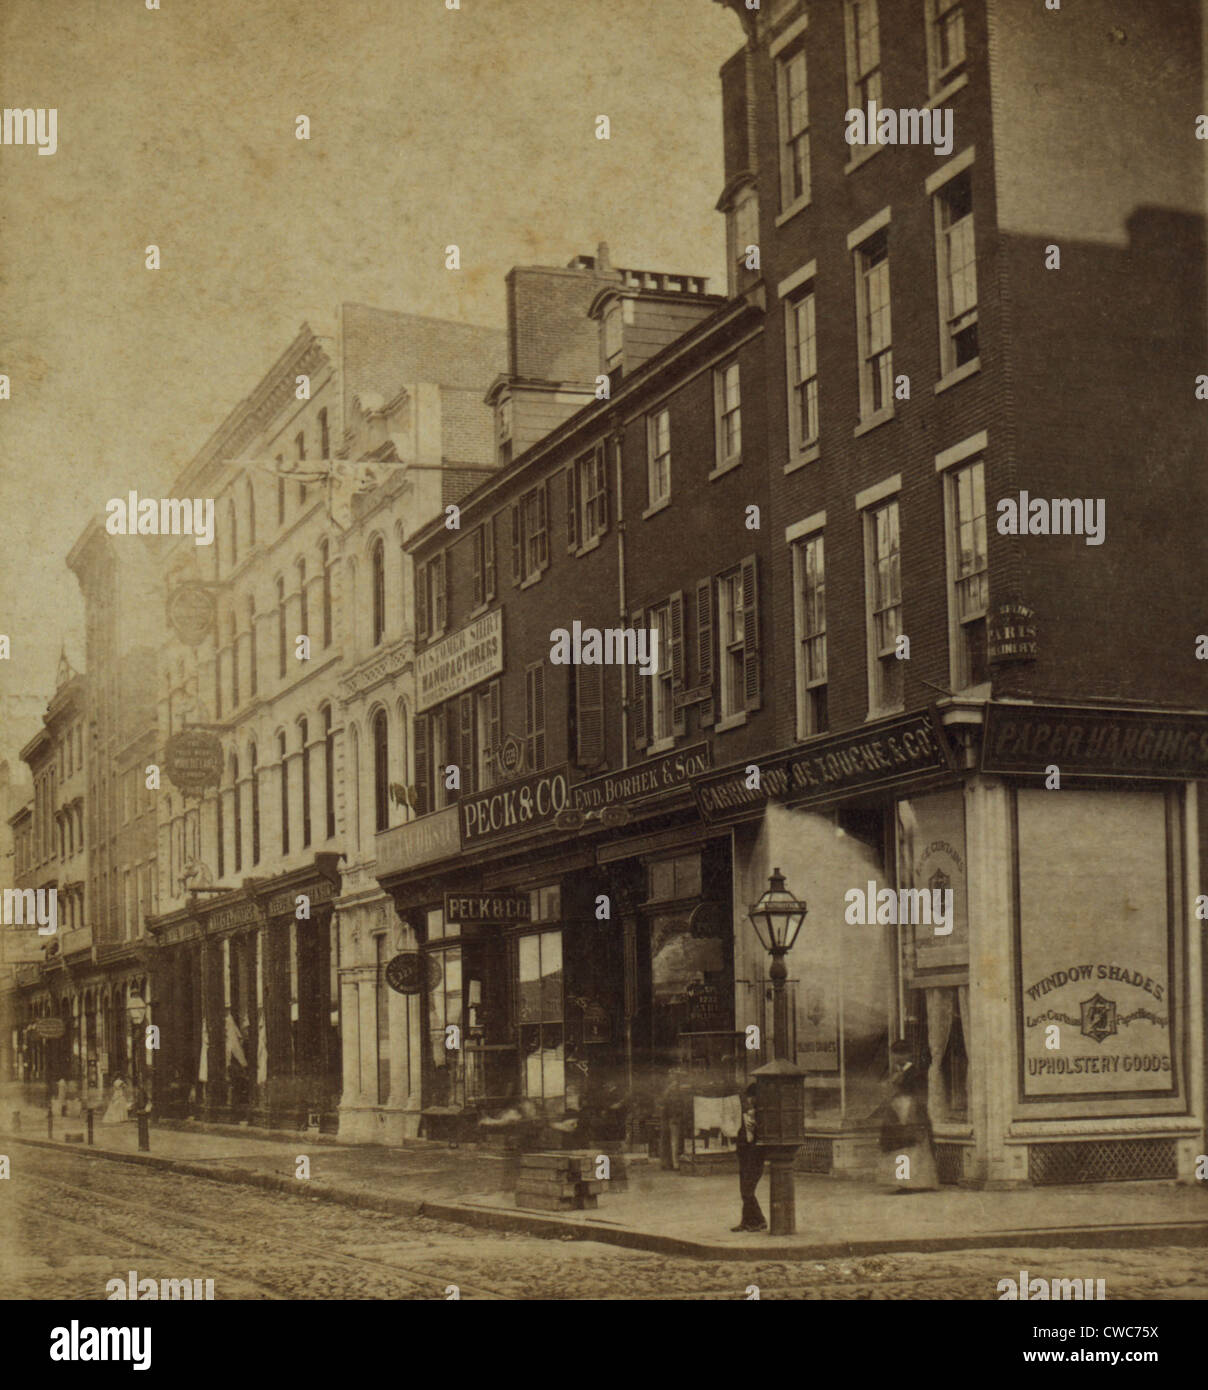 Philadelphia in 1870. Stereoscopic view of Chestnut Street below 11th street on the South Side. Shops sell consumer goods and Stock Photo